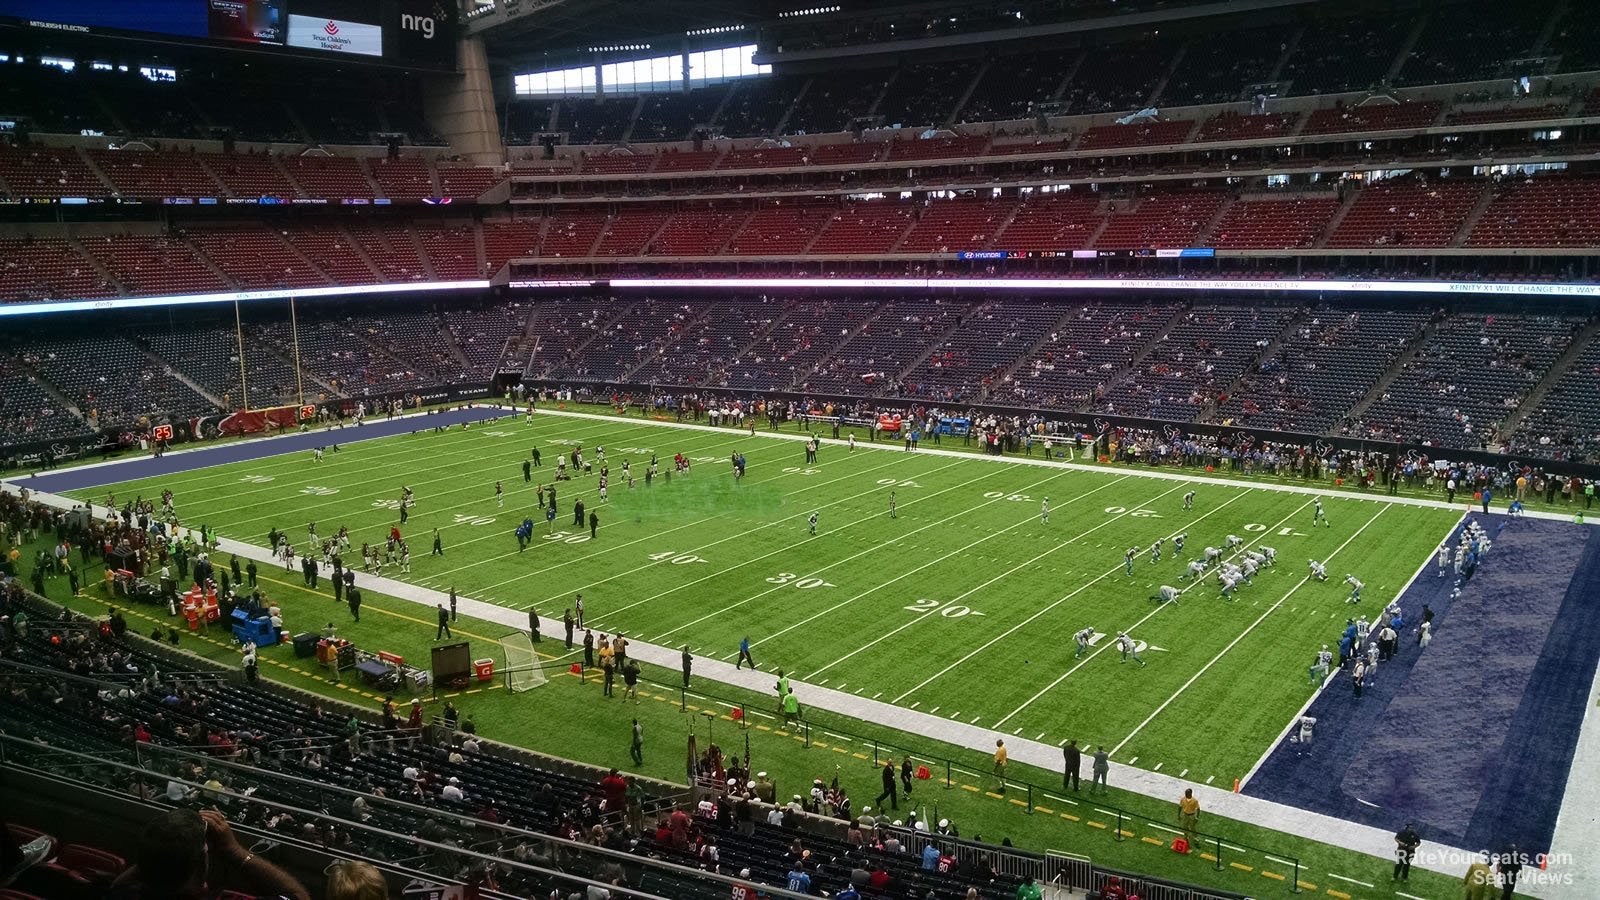 section 305, row l seat view  for football - nrg stadium